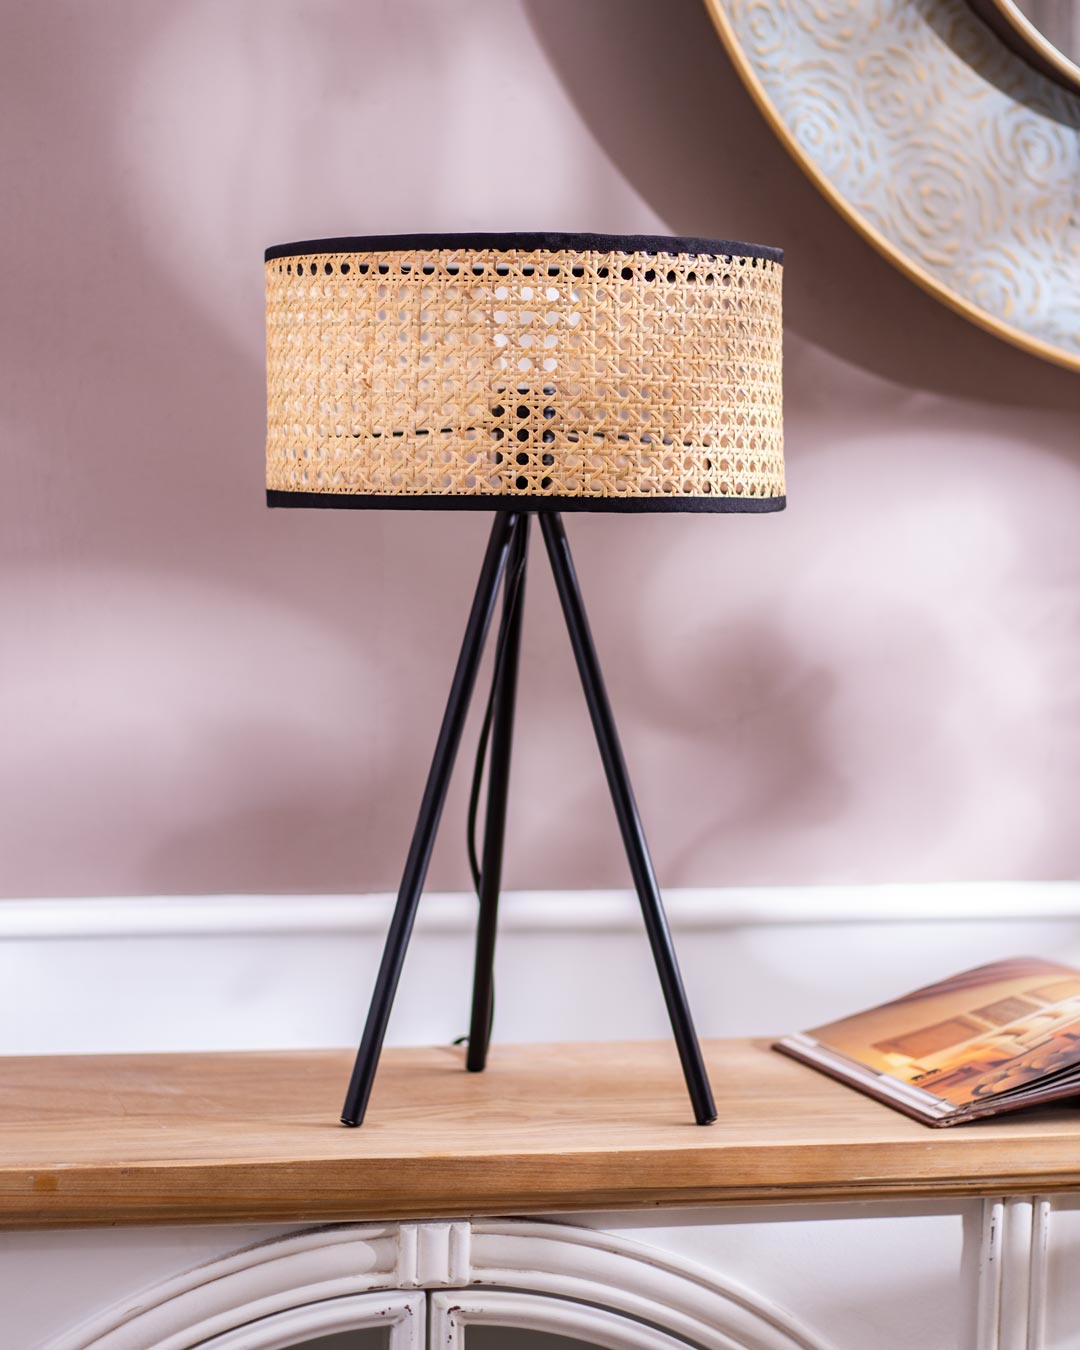 Metallic Glow: Table Lamp with Wooden Net Shade - Black